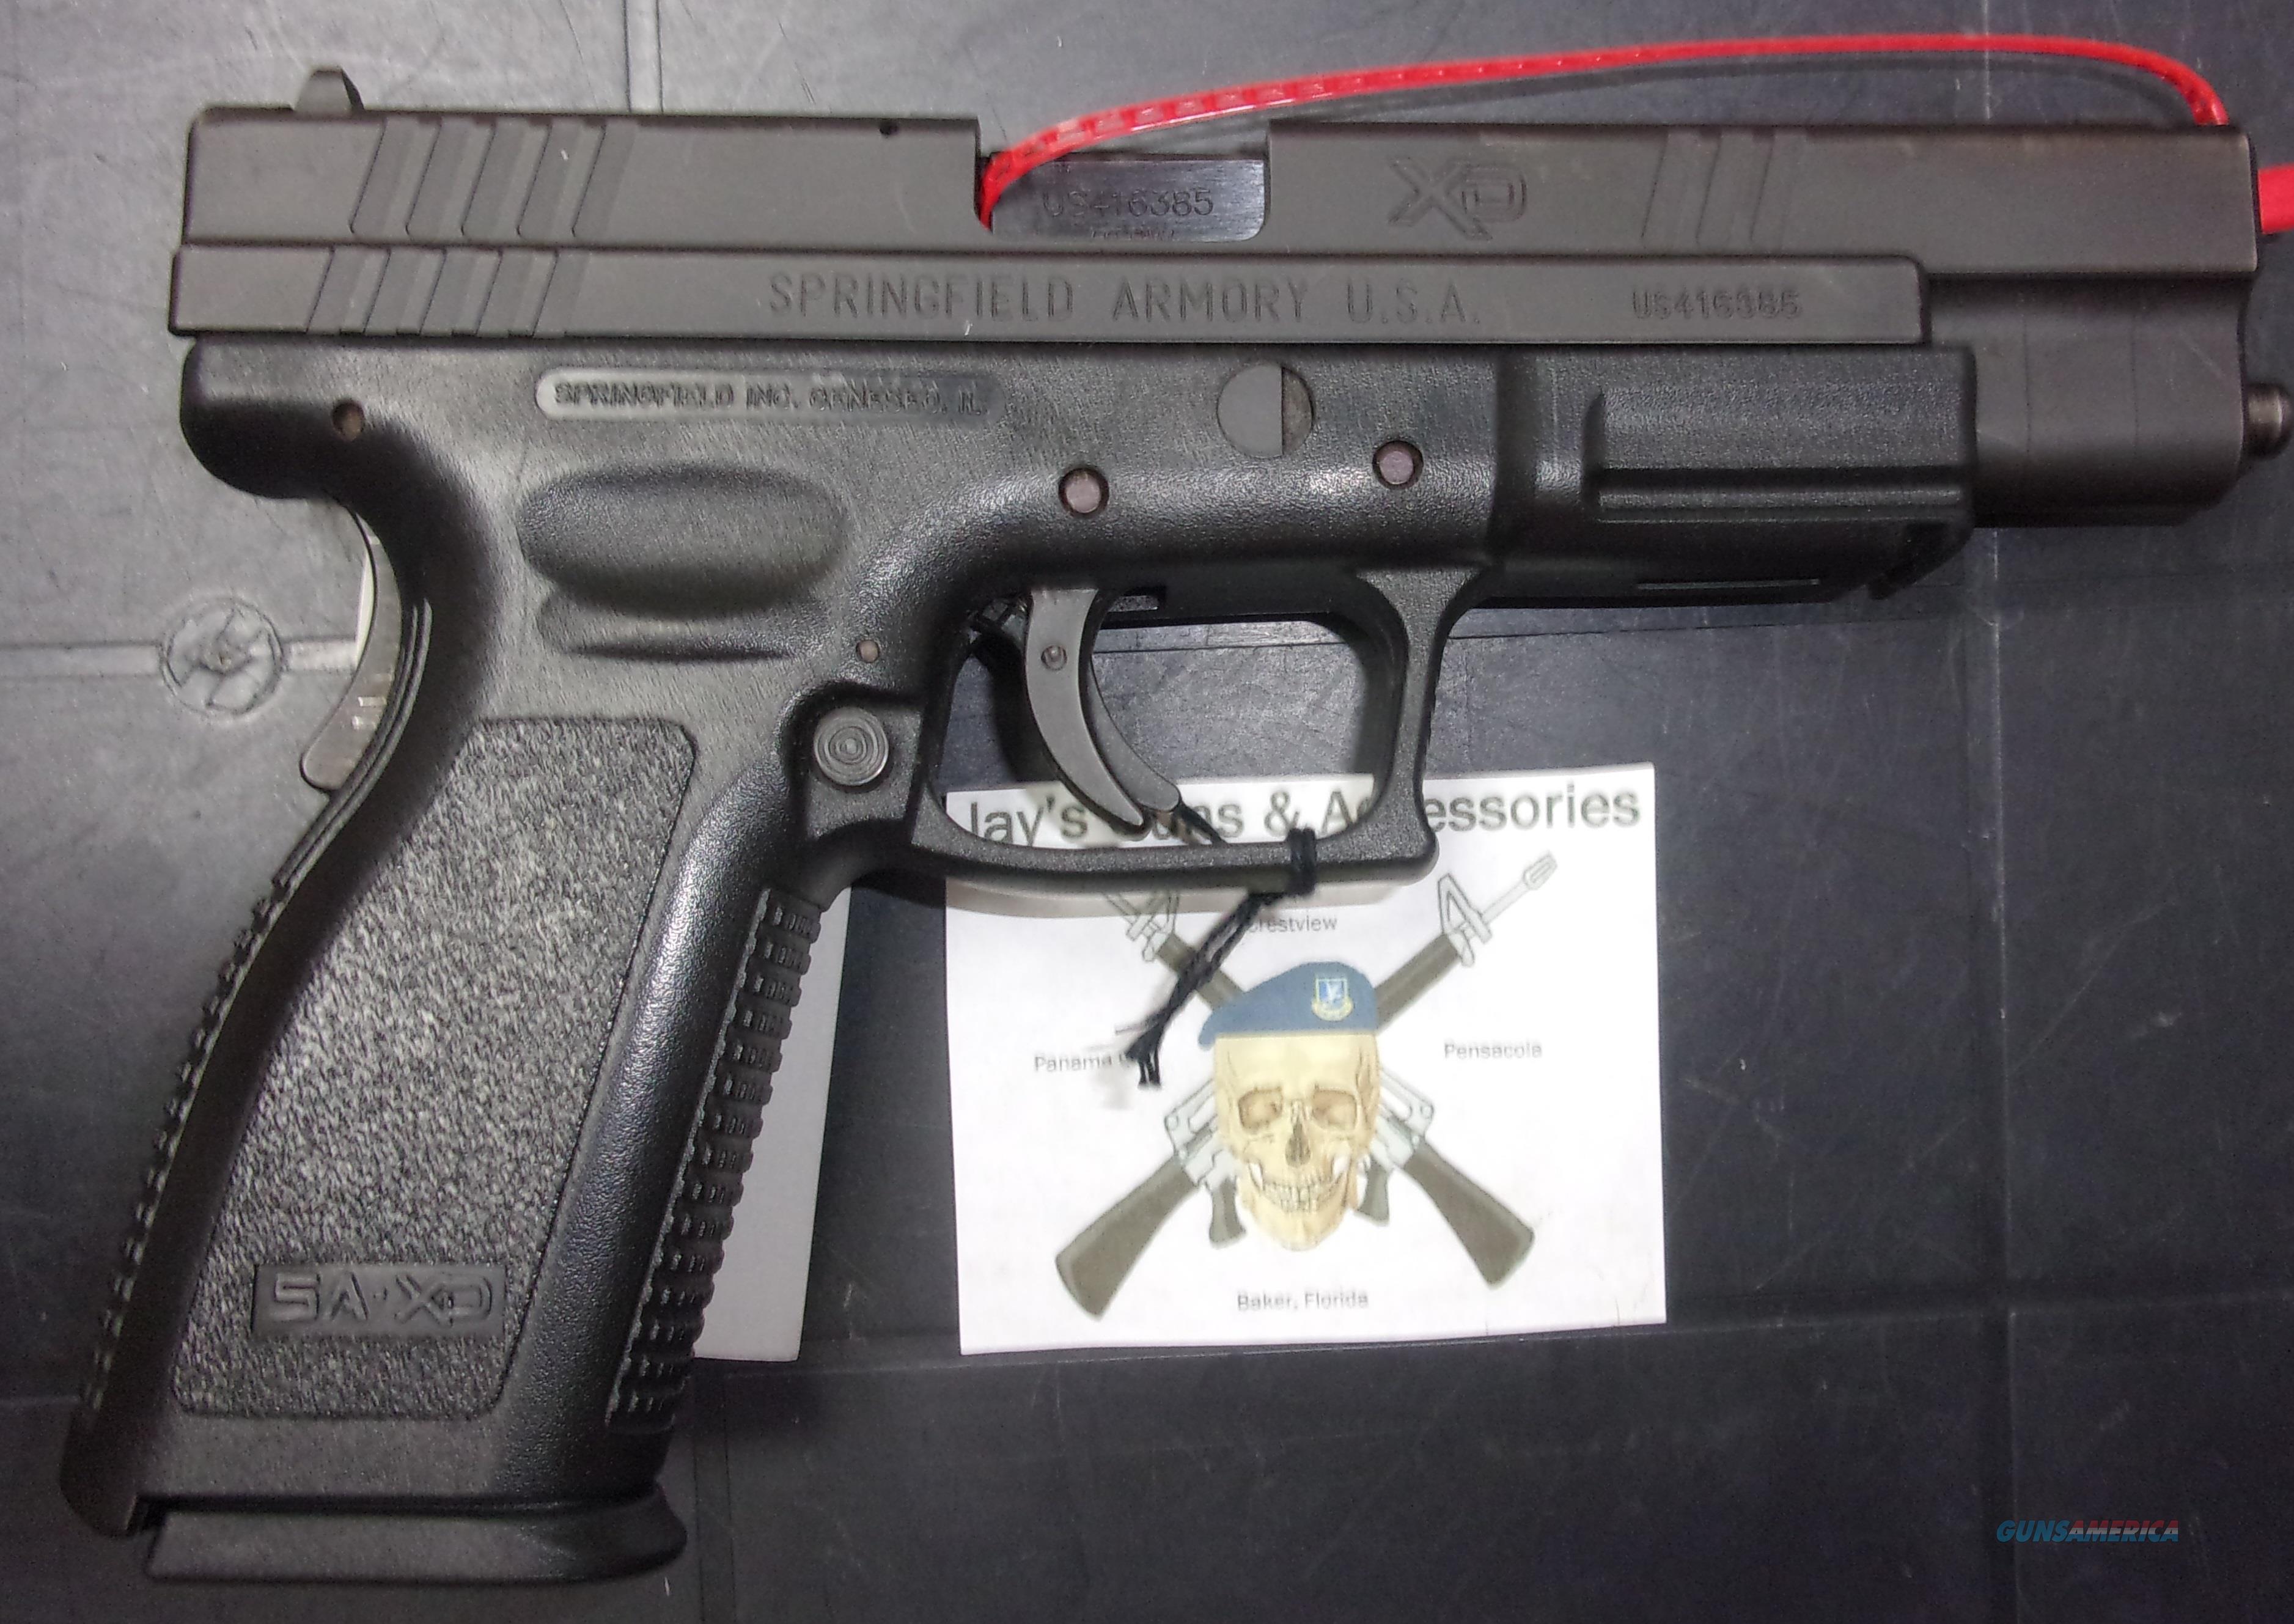 Springfield Armory Xd 40 Tactical For Sale At 940577459